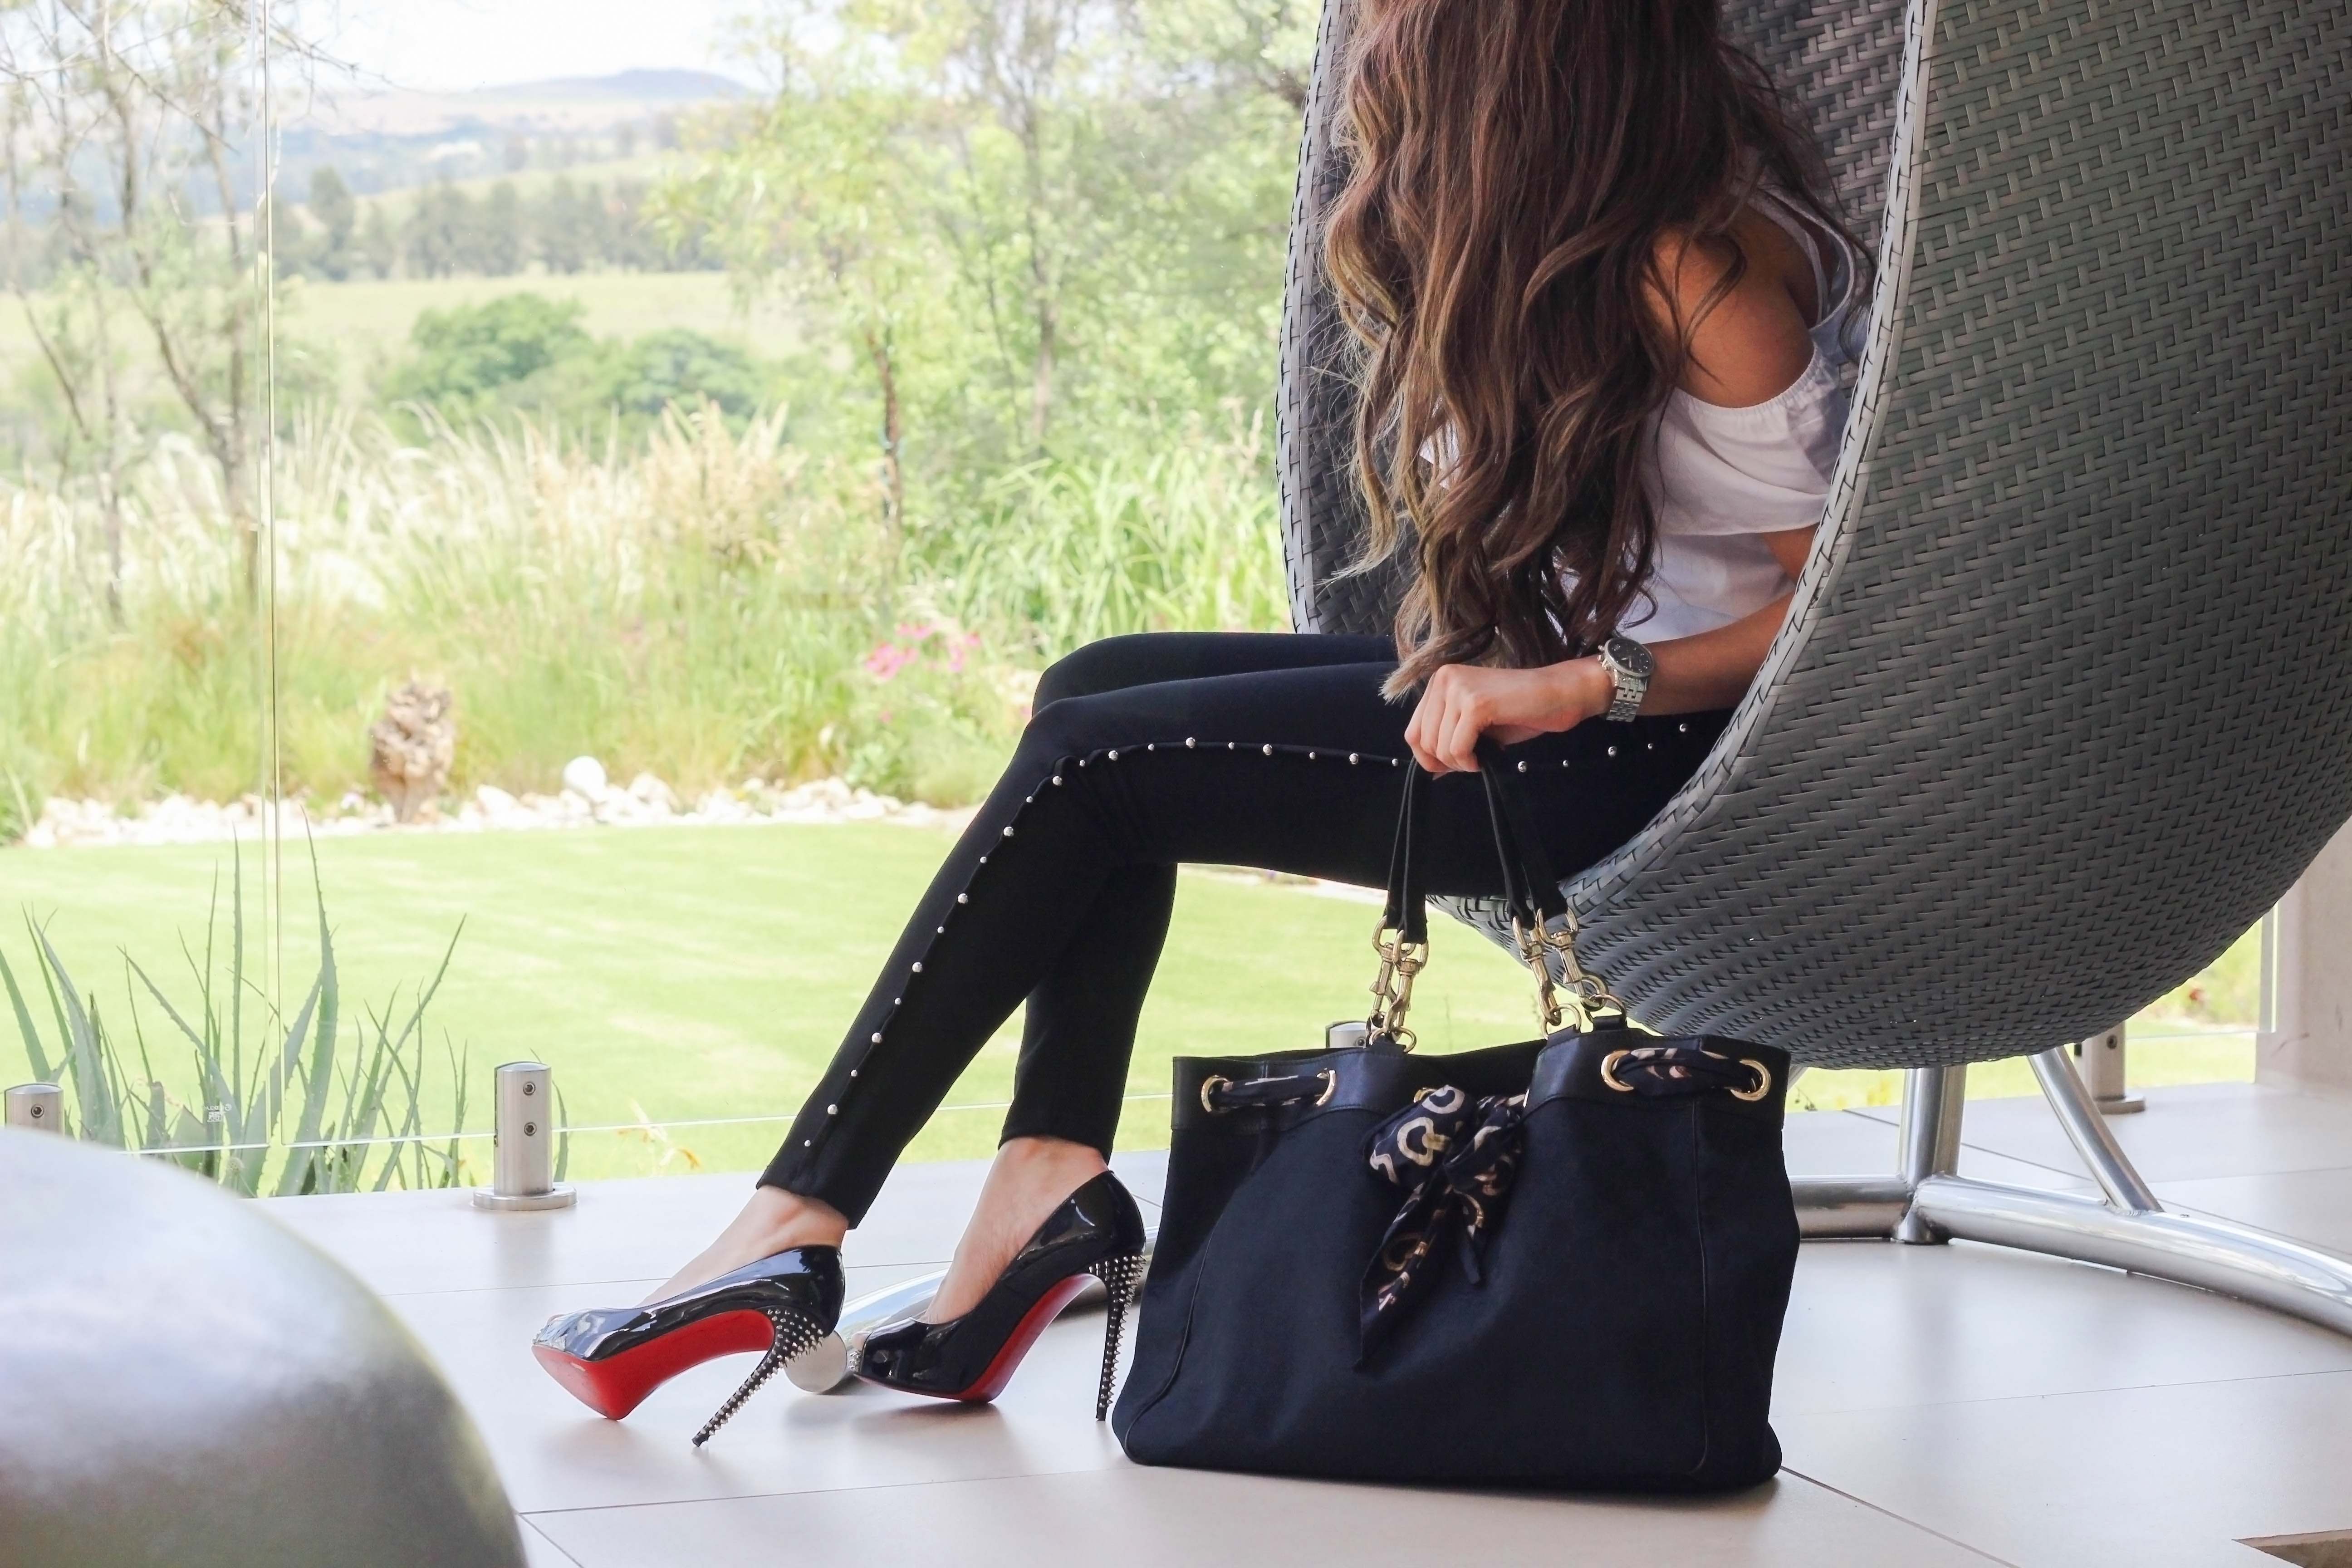 Louboutin shoes and bags